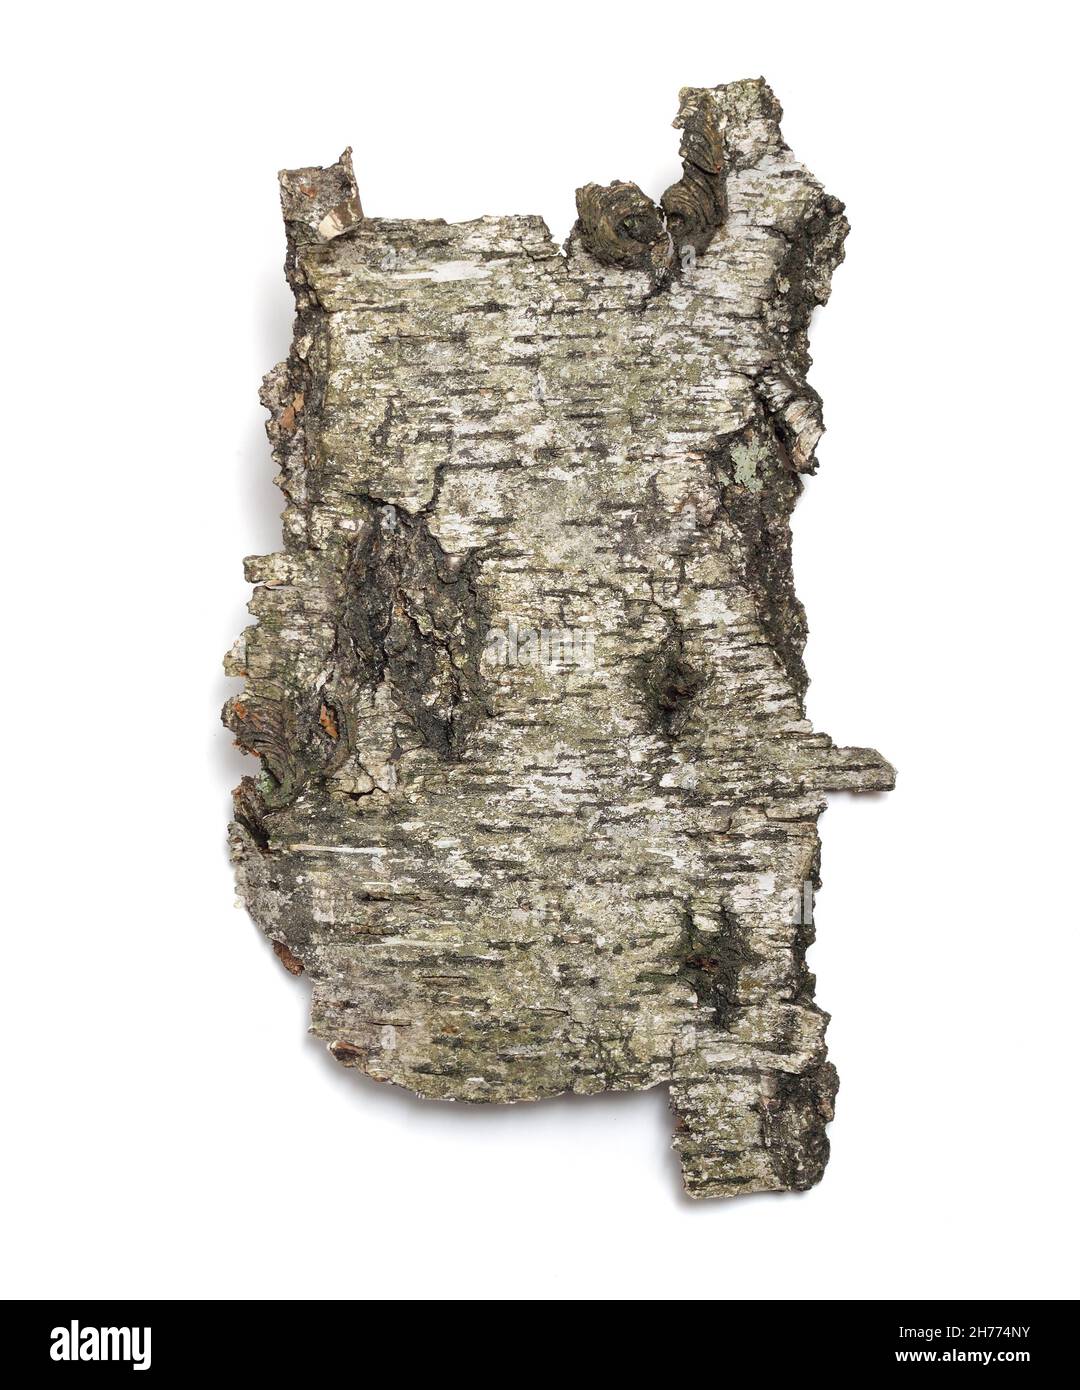 The front sides of a piece of aspen bark. Isolated on white background Stock Photo